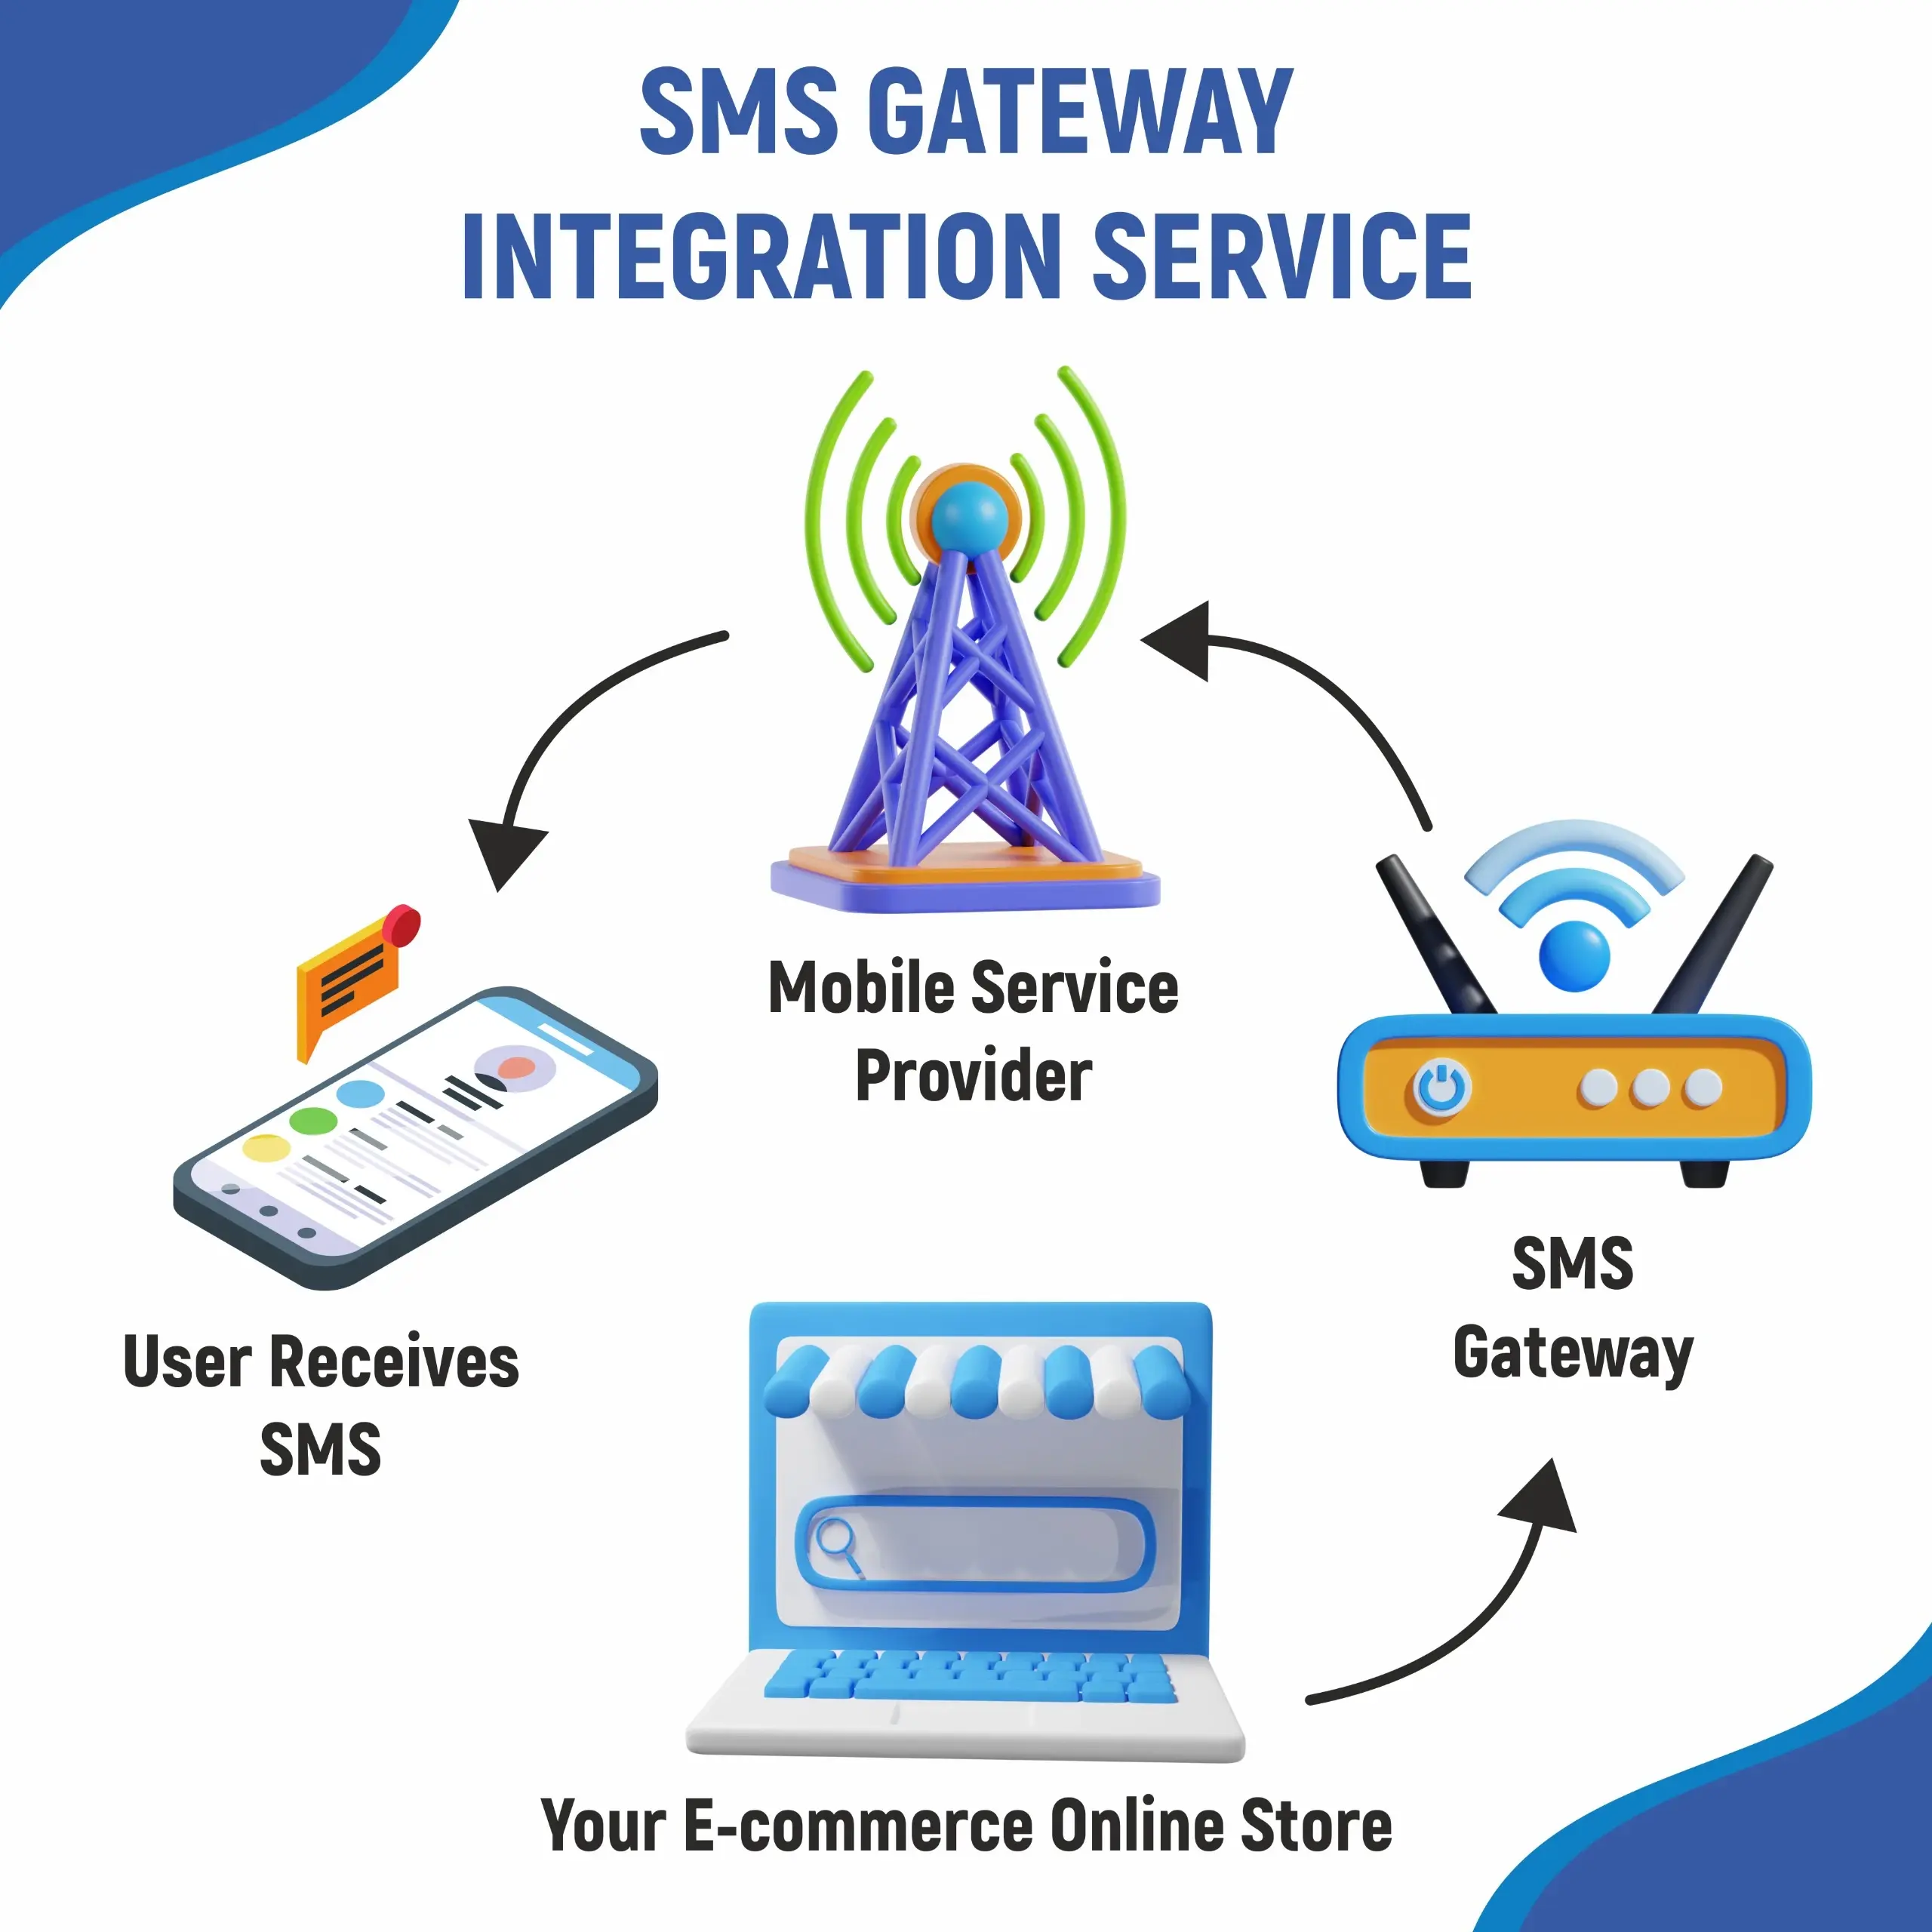 Effortlessly Connect with Your Customers with SMS Gateway Integration Services